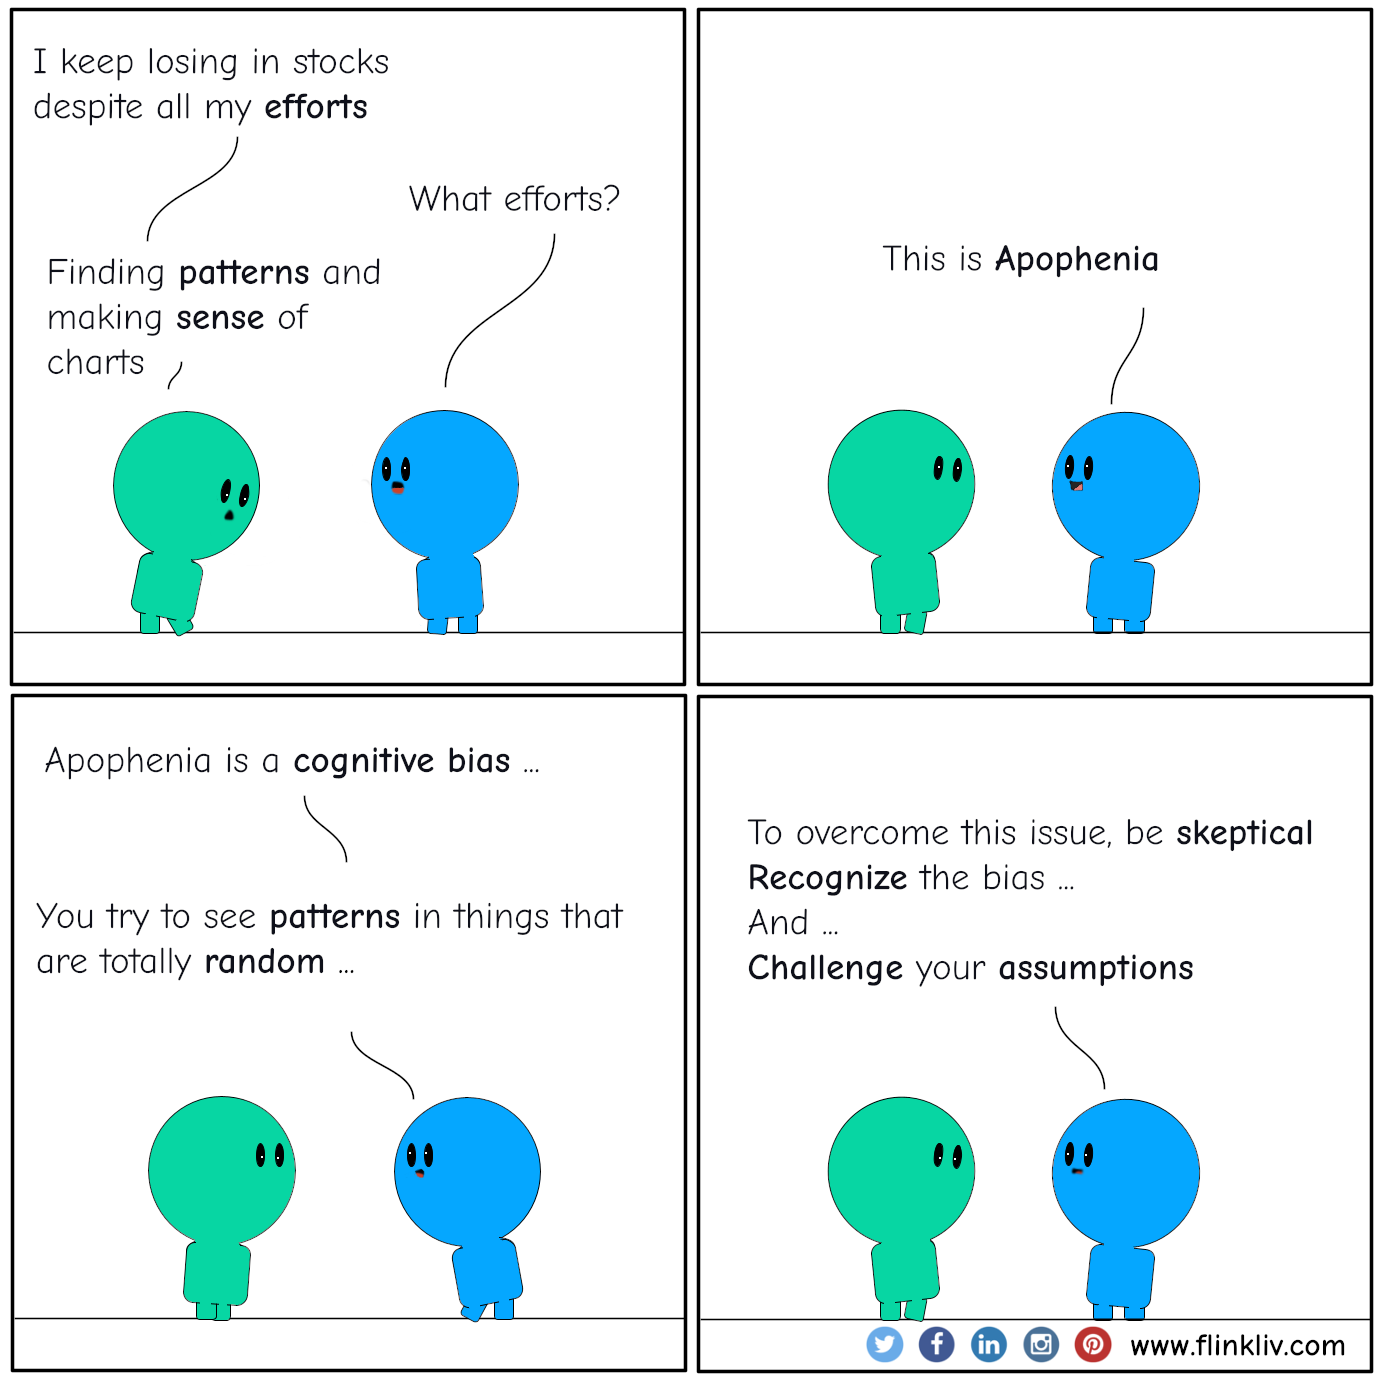 Conversation between A and B about the Apophenia bias. A: I keep losing in stocks despite all my efforts B: What efforts? A: Finding patterns and making sense of charts B: This is Apophenia B: Apophenia is a cognitive bias; you try to see patterns in things that are totally random. B: To overcome this issue, be skeptical, recognize the bias, and challenge your assumptions.
				By Flinkliv.com